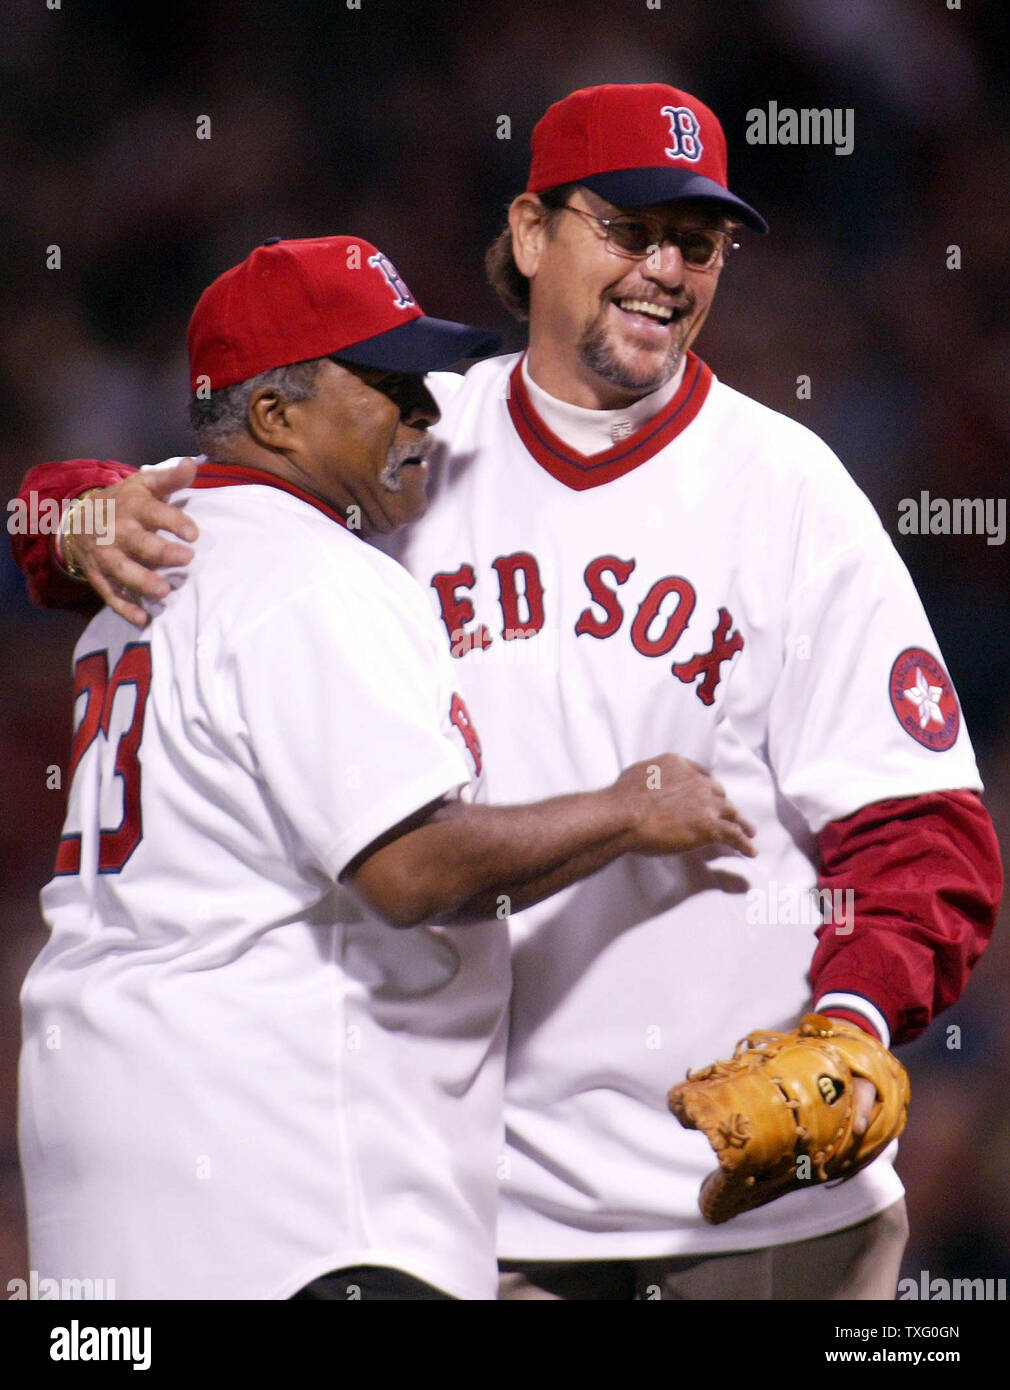 Retired pitcher Luis Tiant and Hall of Fame Catcher Carlton Fisk, of the  1975 Boston Red Sox Team, embrace on the pitching mount, after throwing out  and catching the first pitch, as